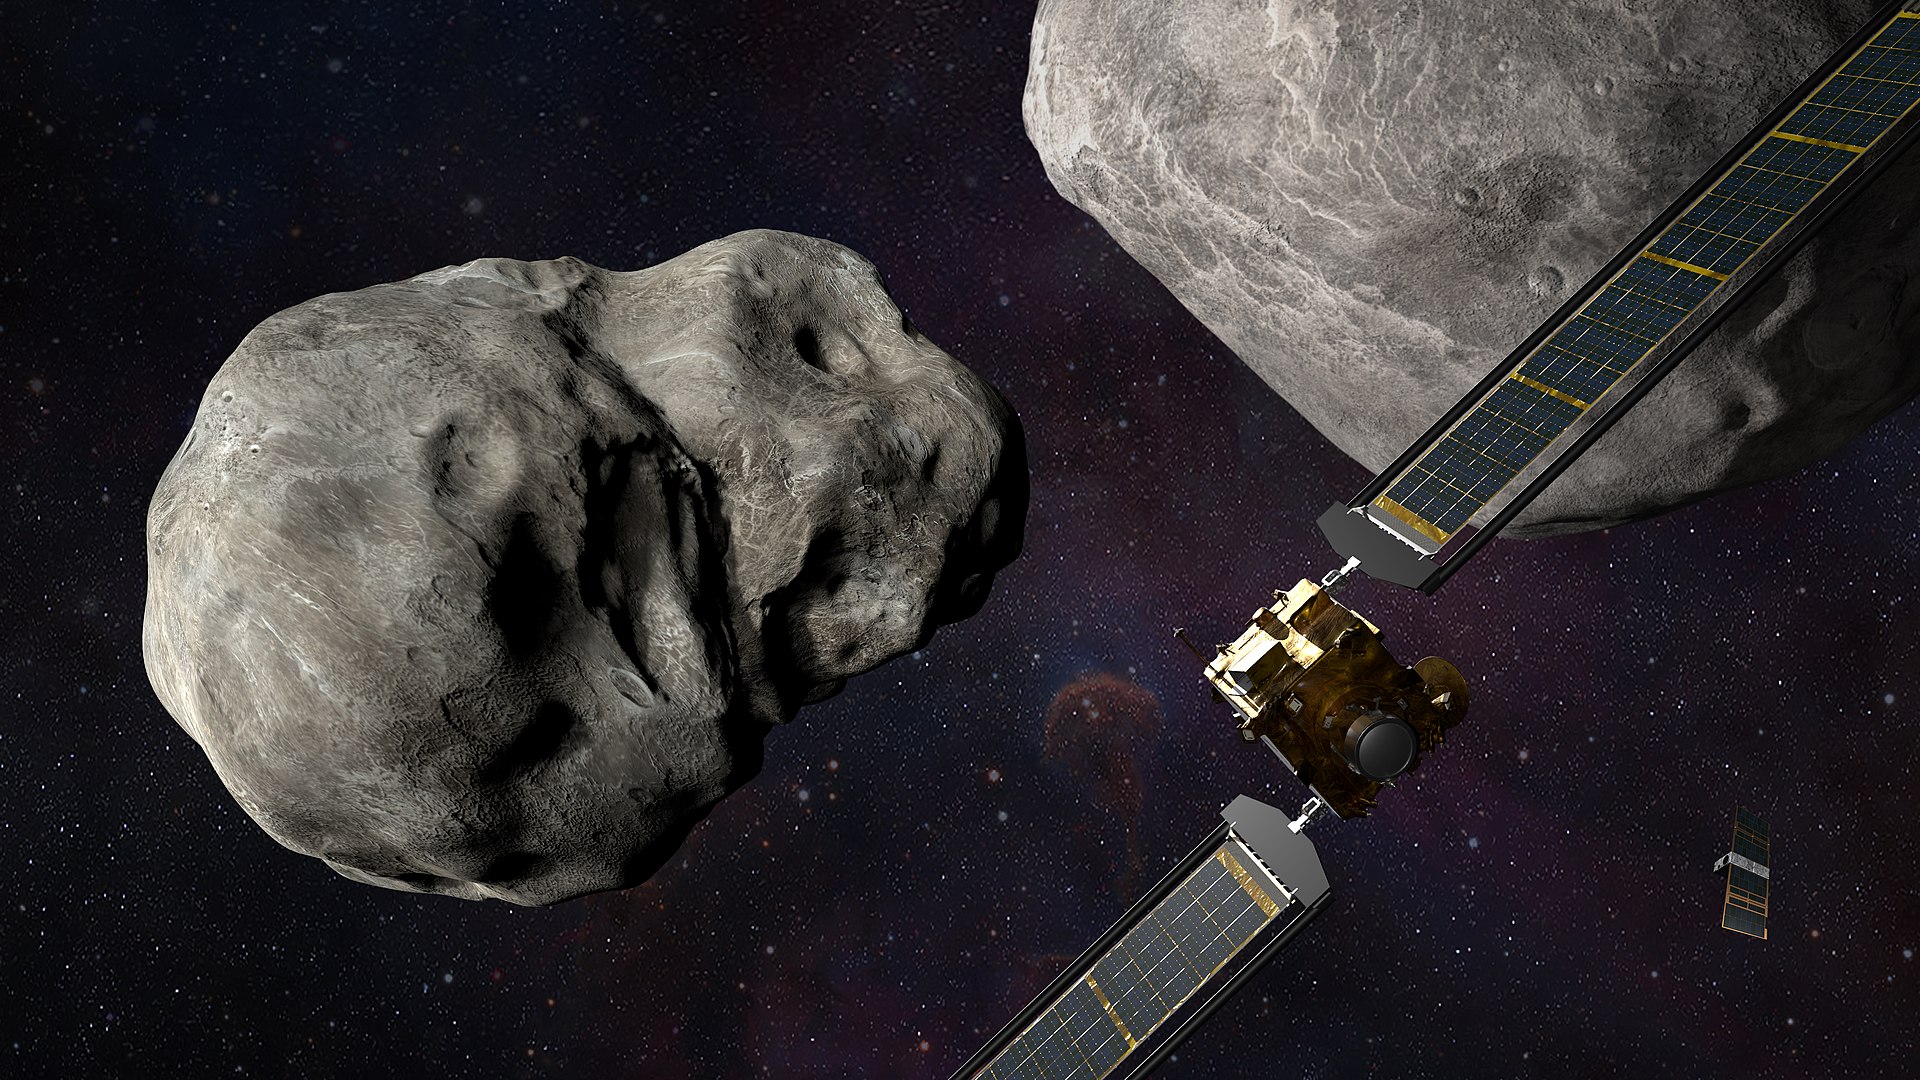 NASA is about to crash a spacecraft into an asteroid… but why?